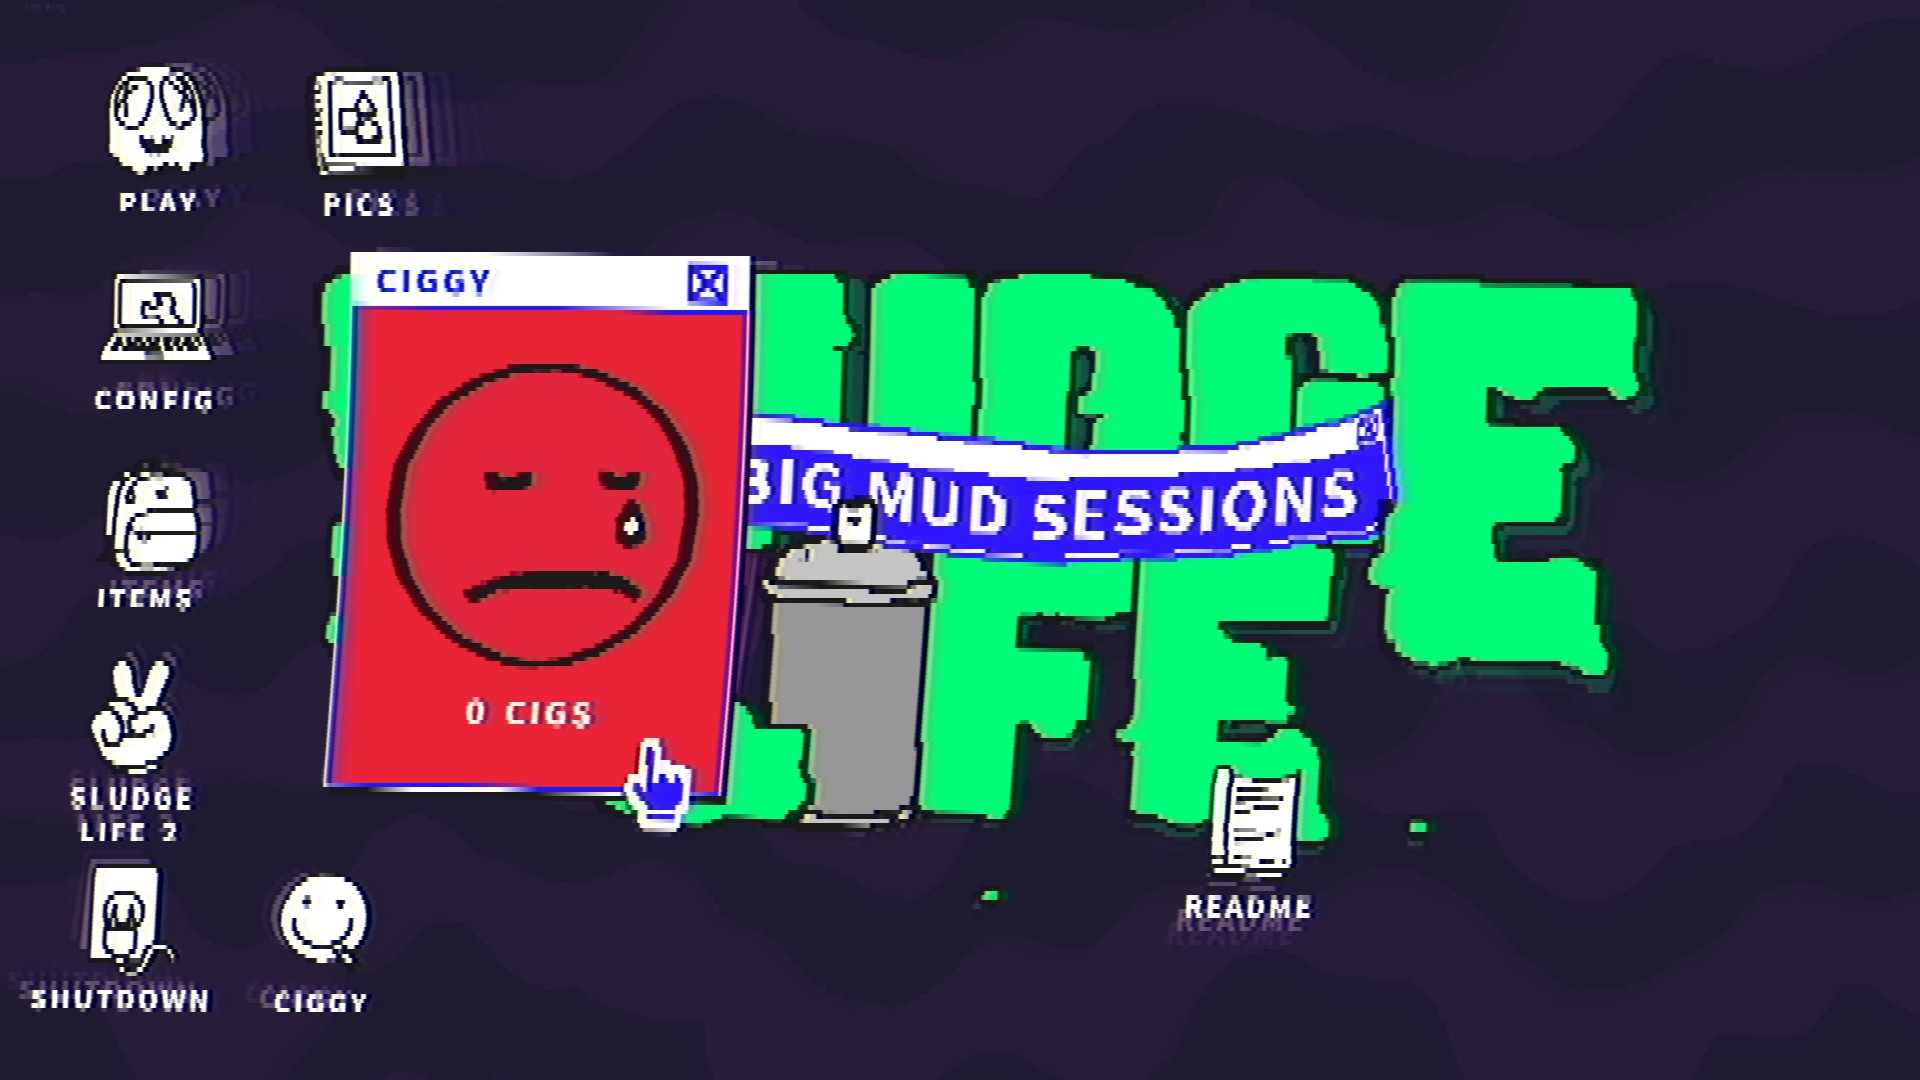 A screenshot showing the menu screen of Sludge Life: The MUD Sessions, a video game.